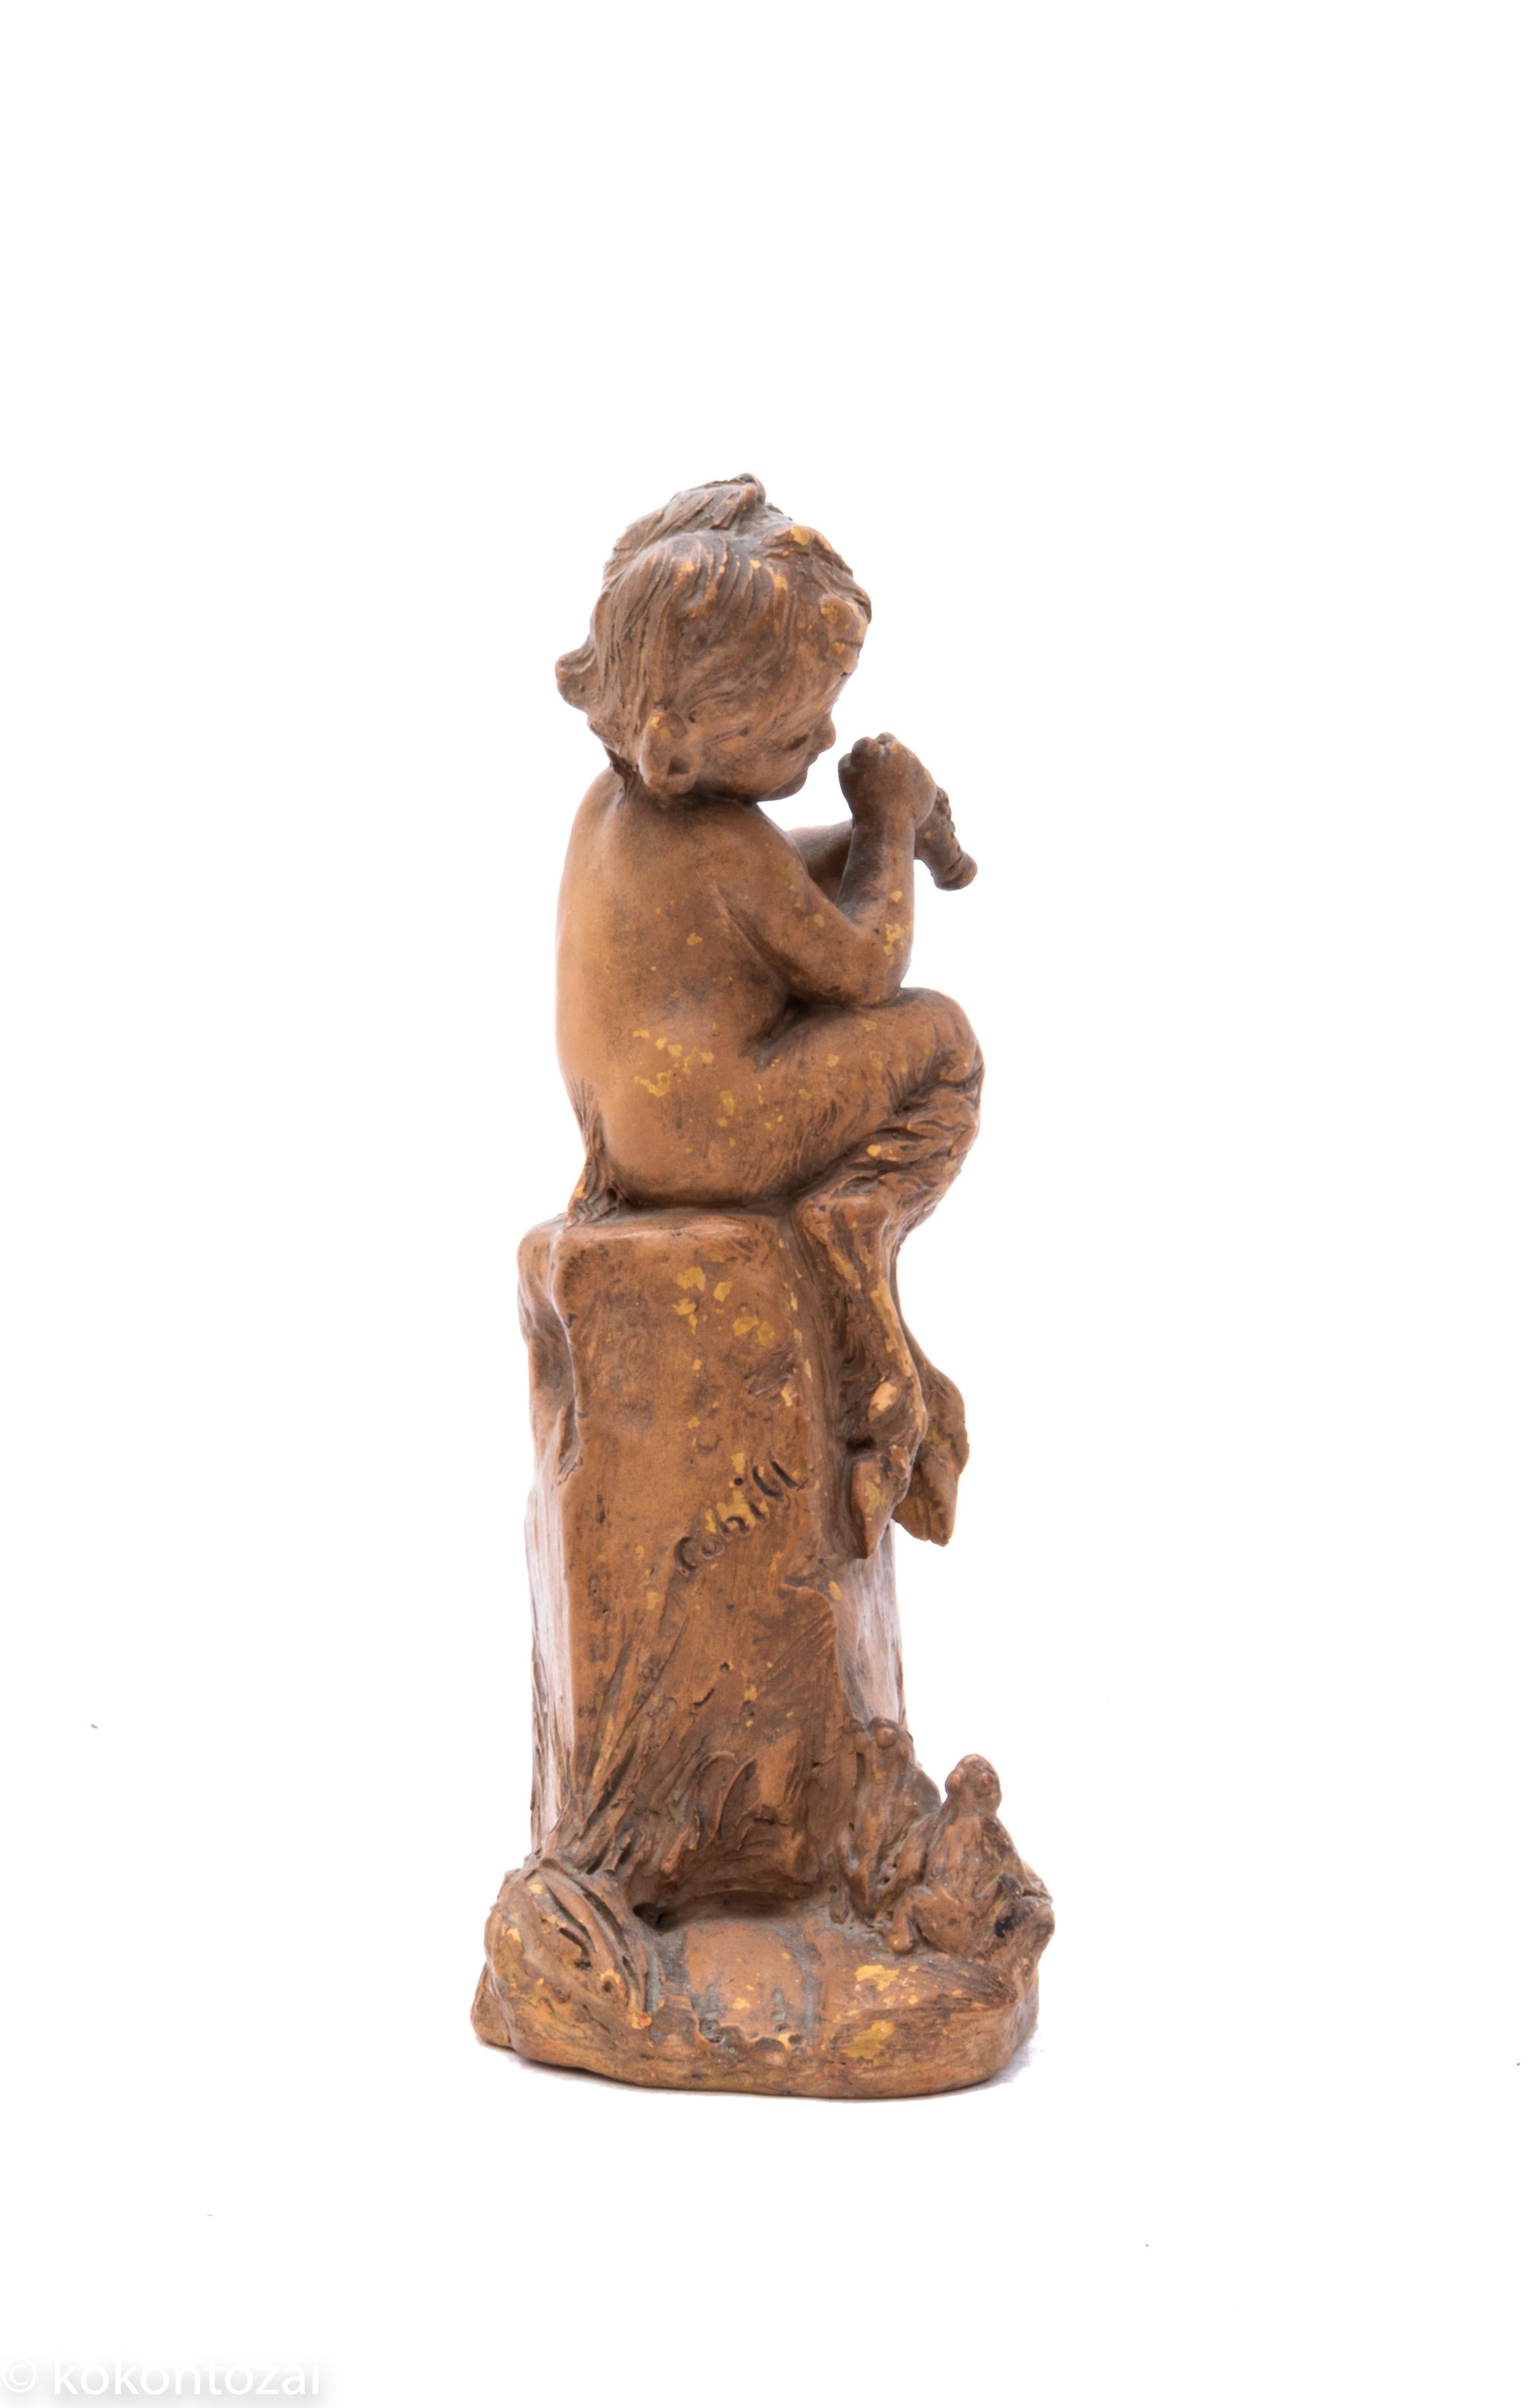 Hand-Carved Late 19th Century French Faun Sculpture Signed by Cohill